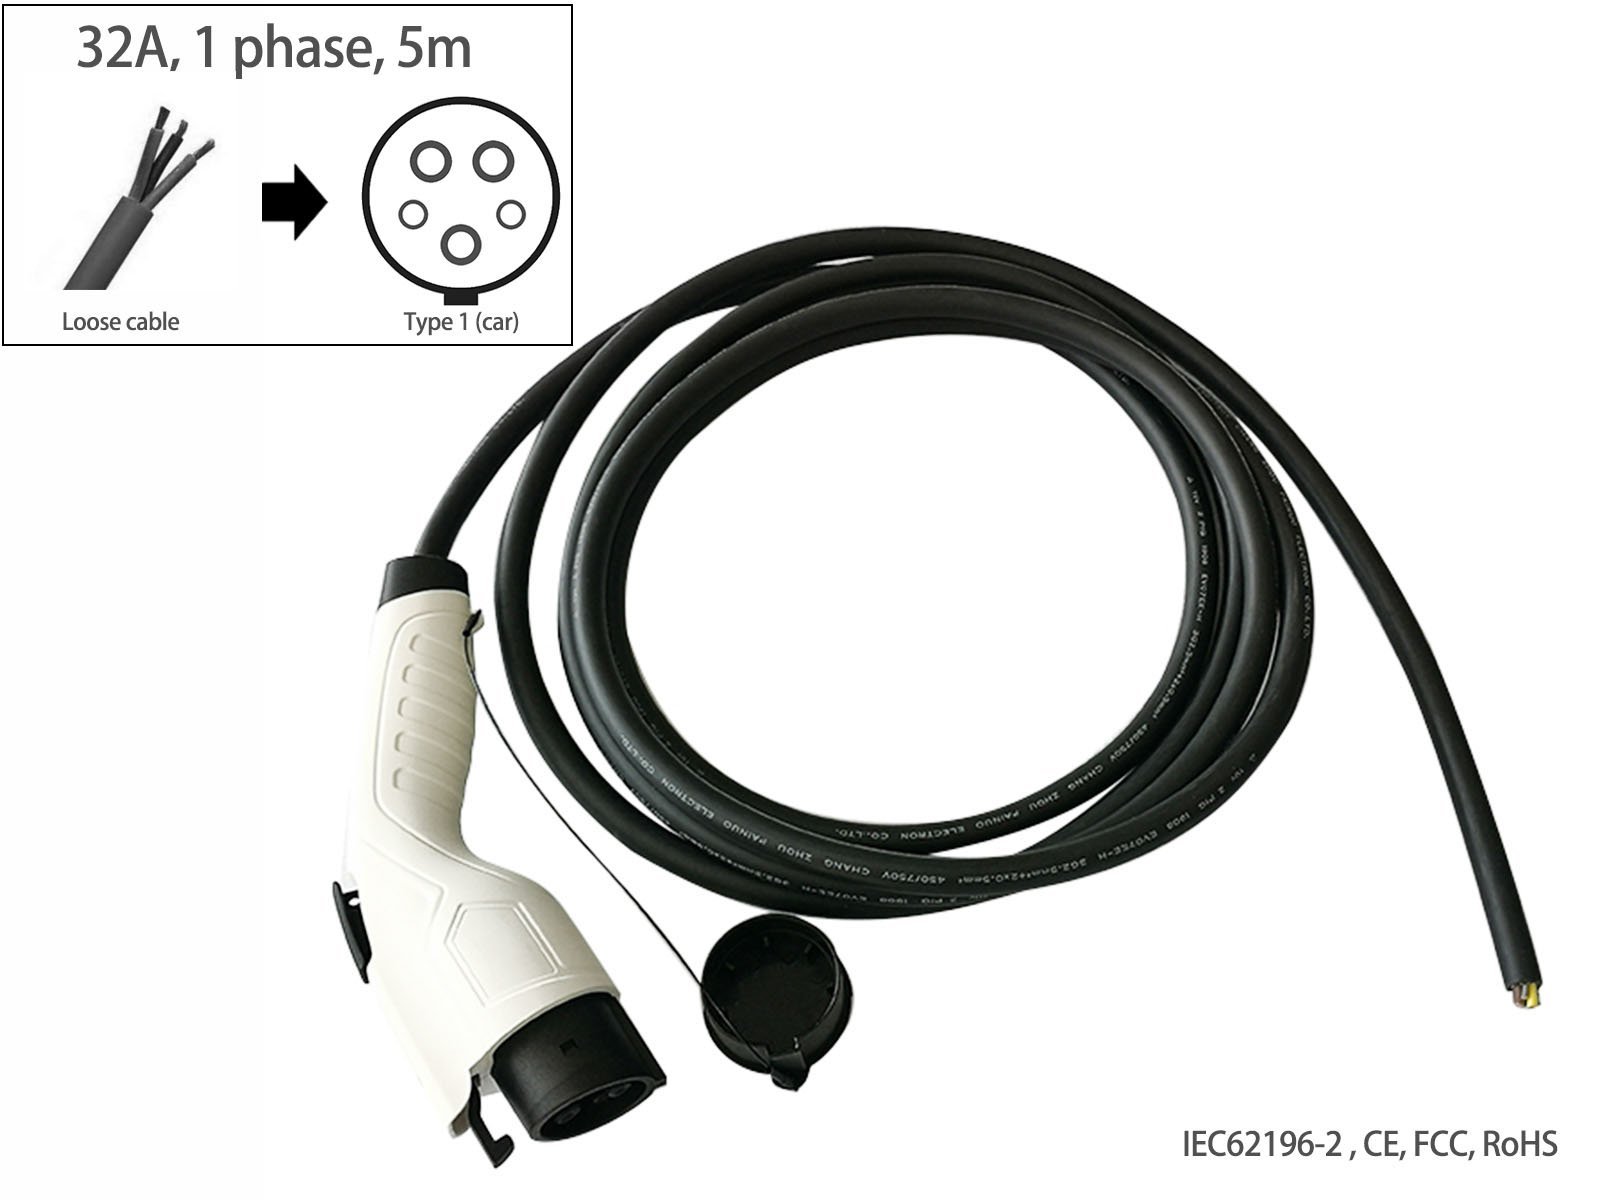 EV charging cable,Loose cable to Type 1 (car),32A,single phase,5m,Fisher - Torque Alliance